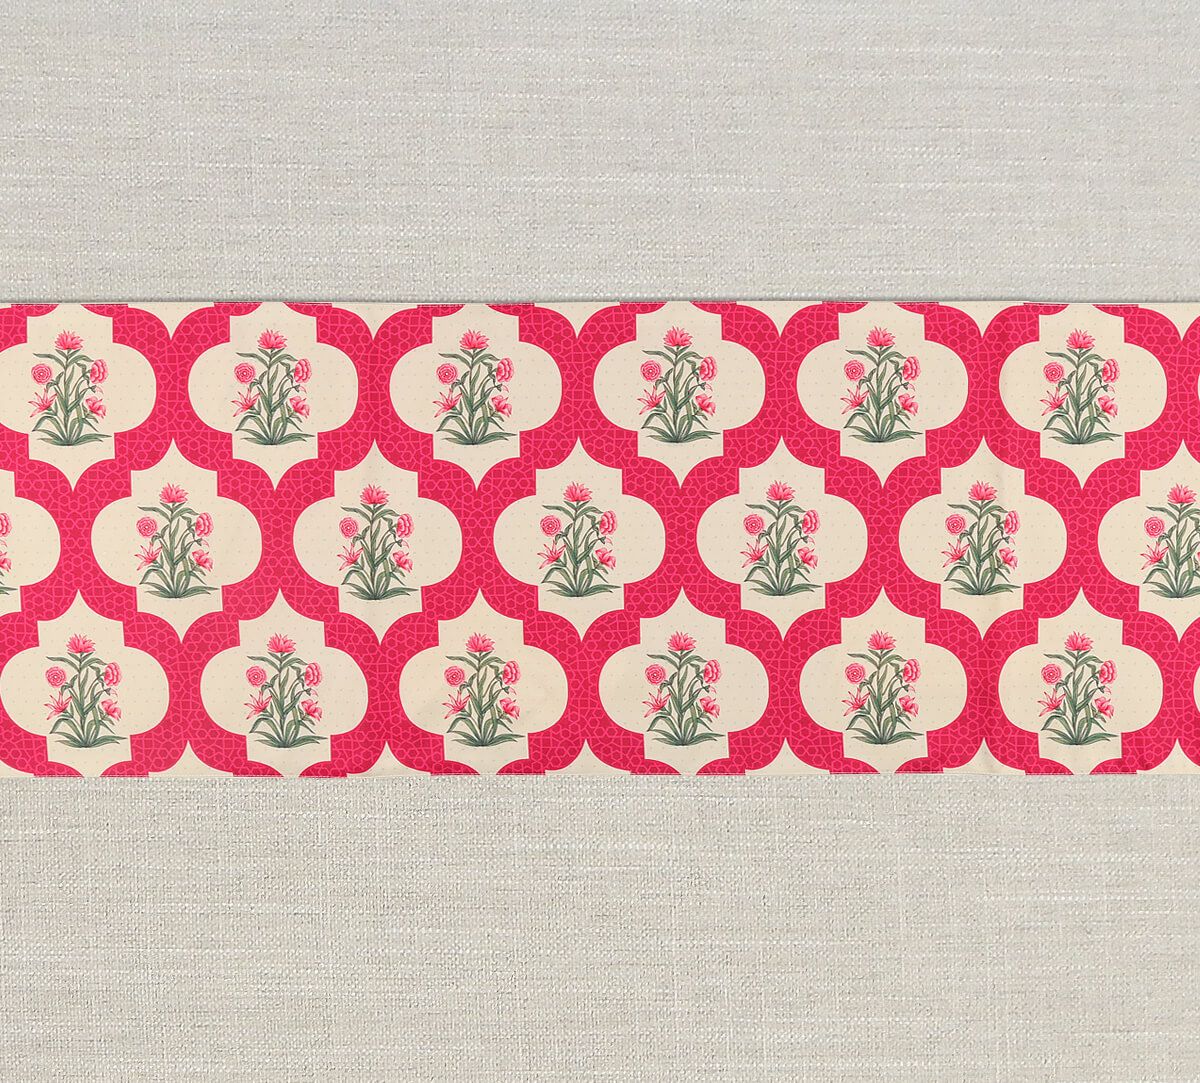 India Circus by Krsnaa Mehta Poppy Flower Scarlet Table and Bed Runner